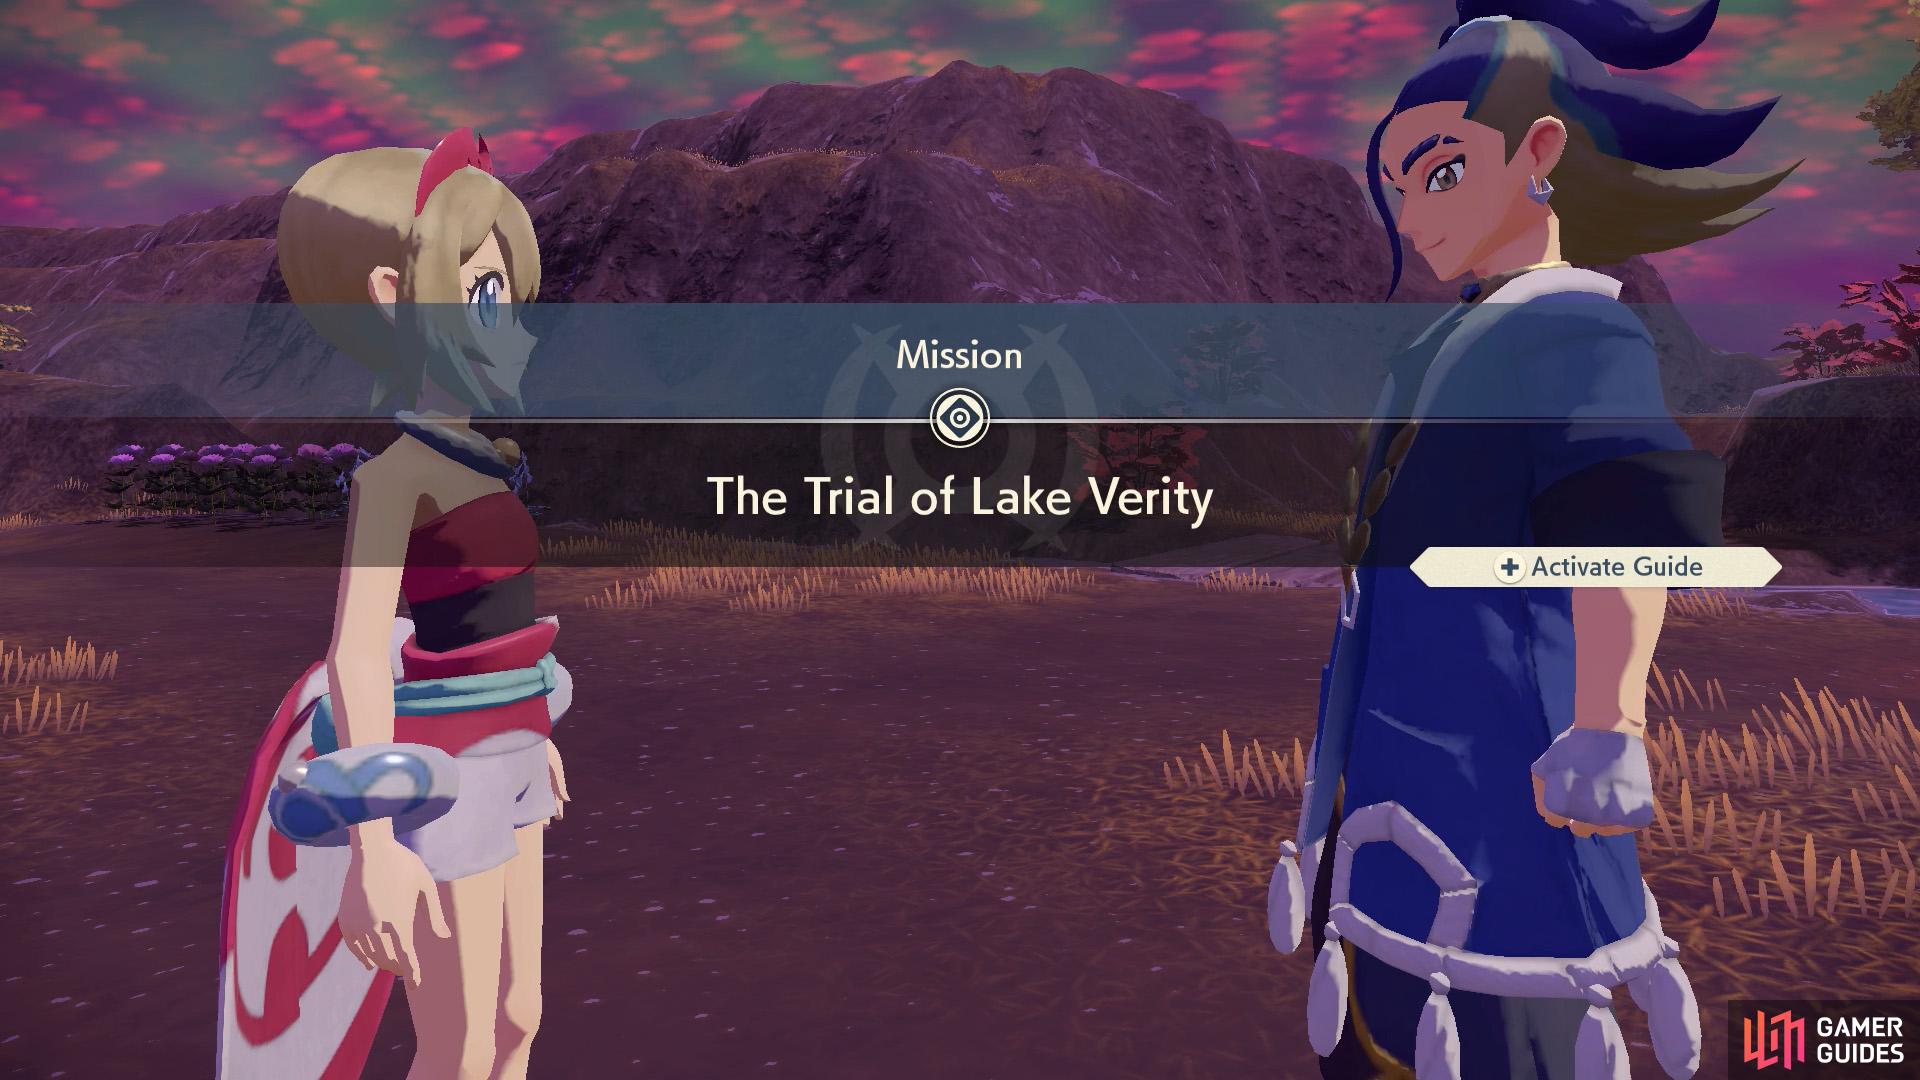 For this mission, you'll need to visit Lake Verity.